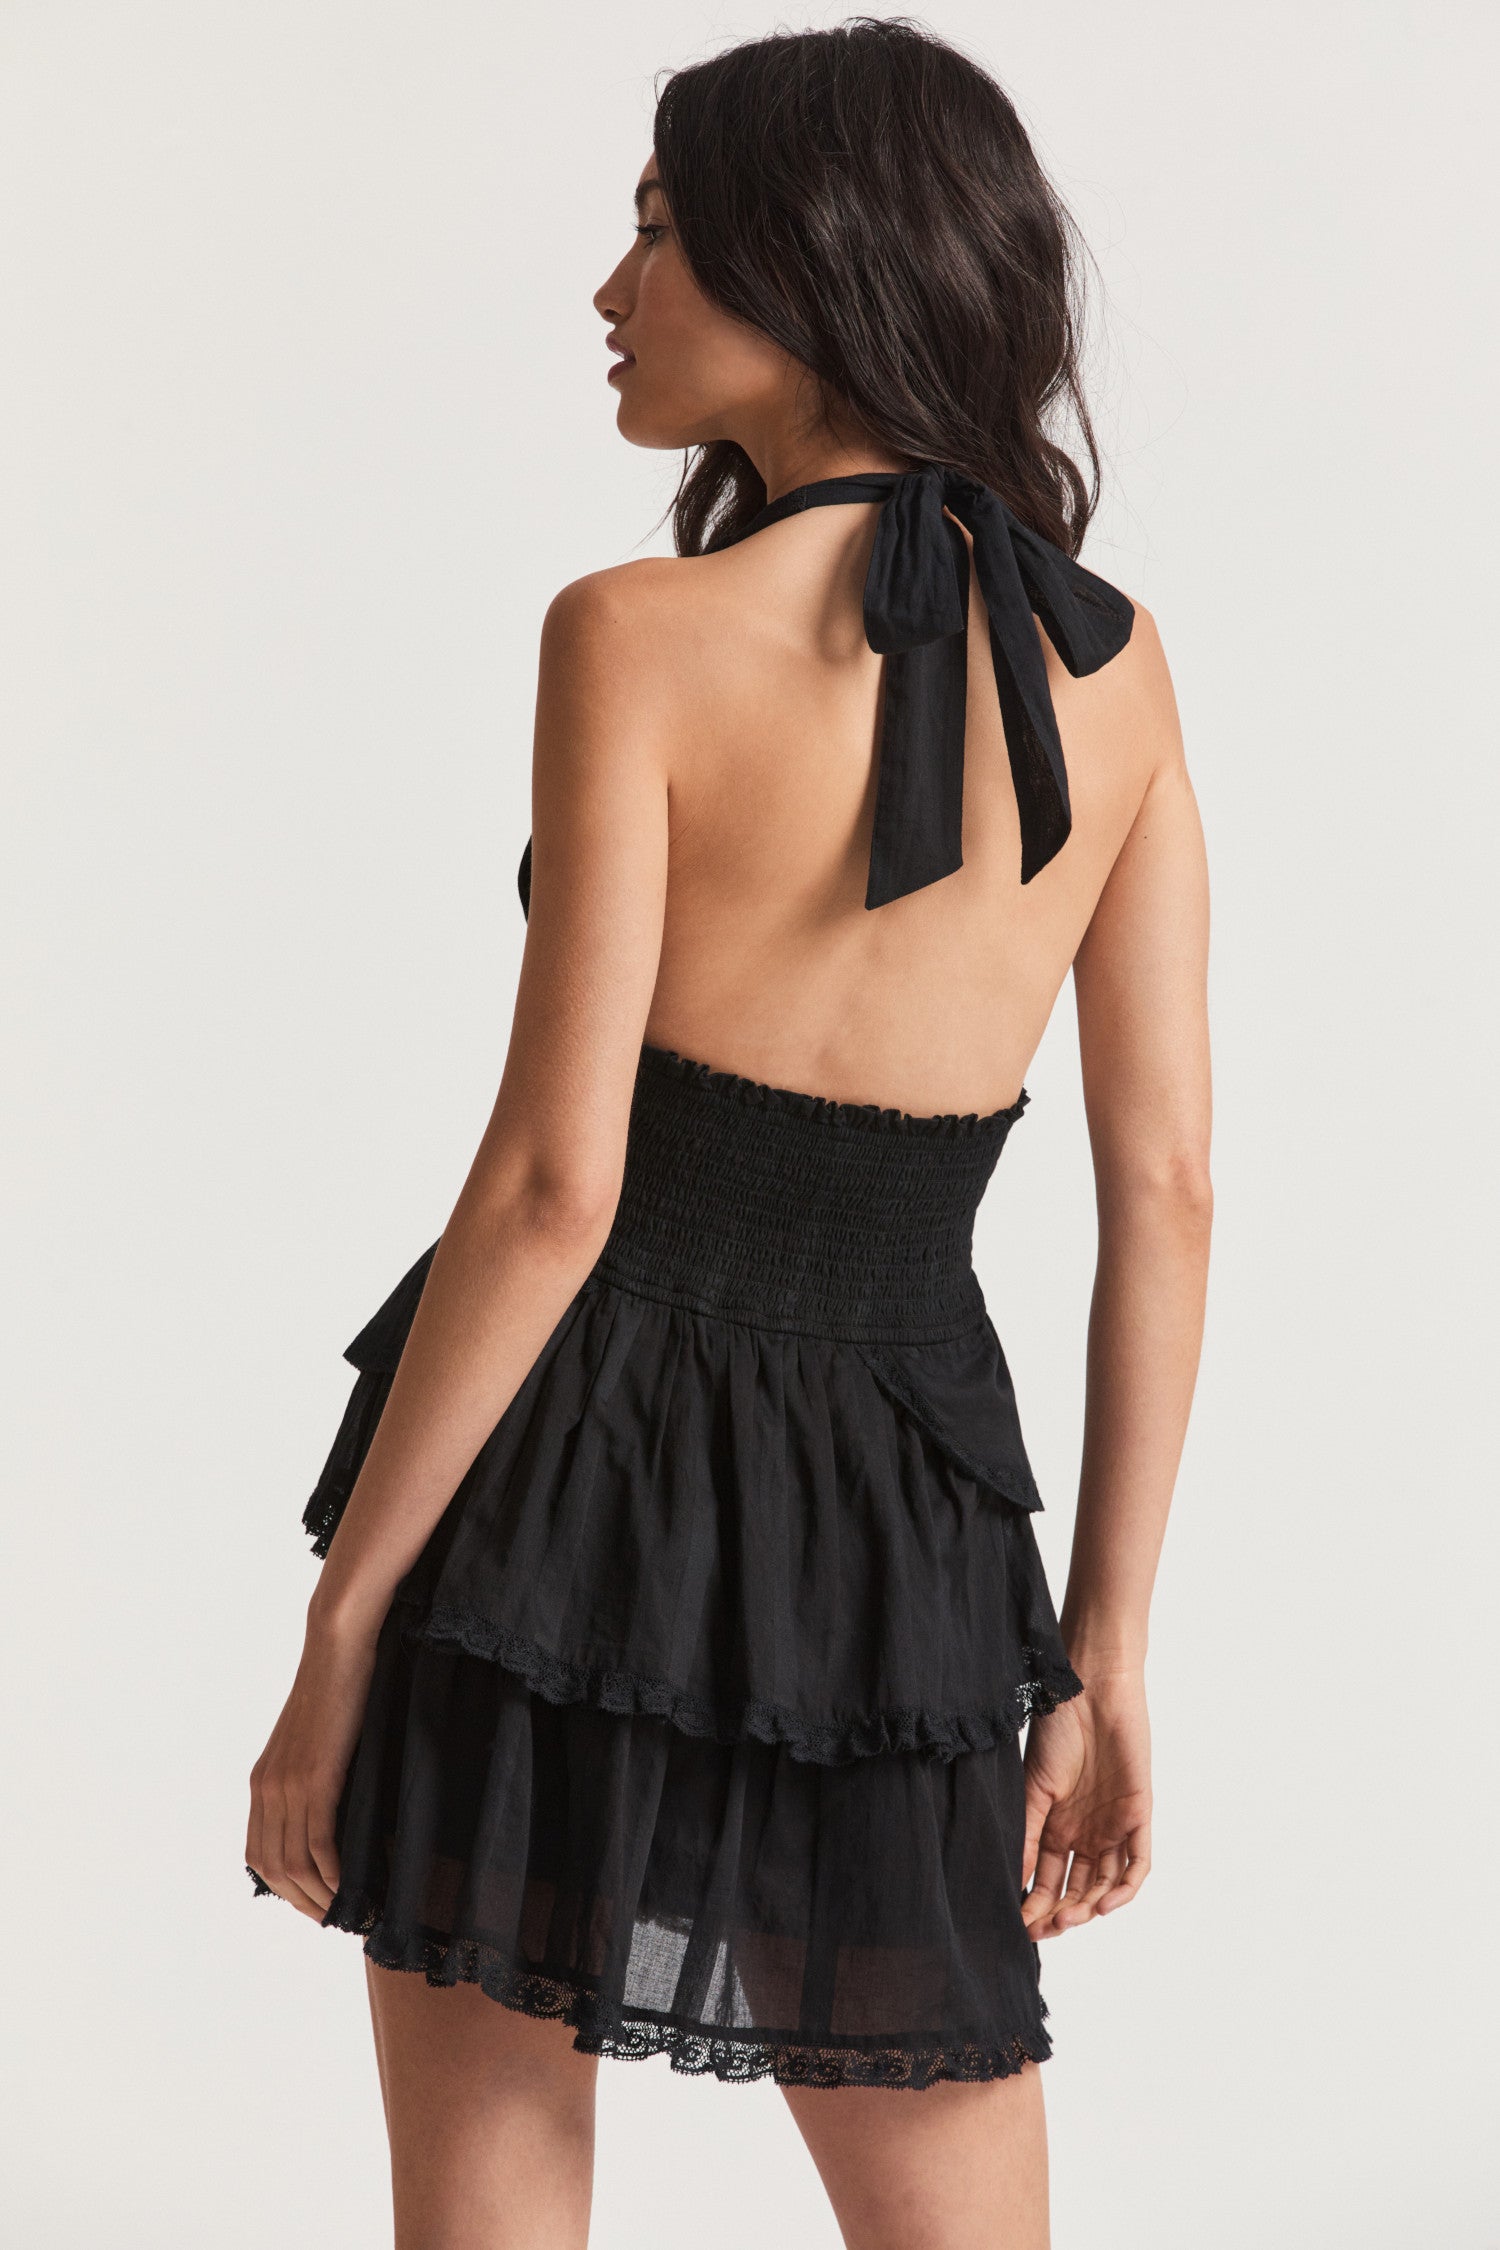 Black mini dress with custom dobby striped cotton with all-over botanical embroidery. This low-cut convertible halter, with piping at the neckline, ties in a generous bow at the neck and can be crossed at front. Below a wide smocked waistband, the skirt flares to smaller details at the hips and two scalloped tiers with schiffli cutwork.